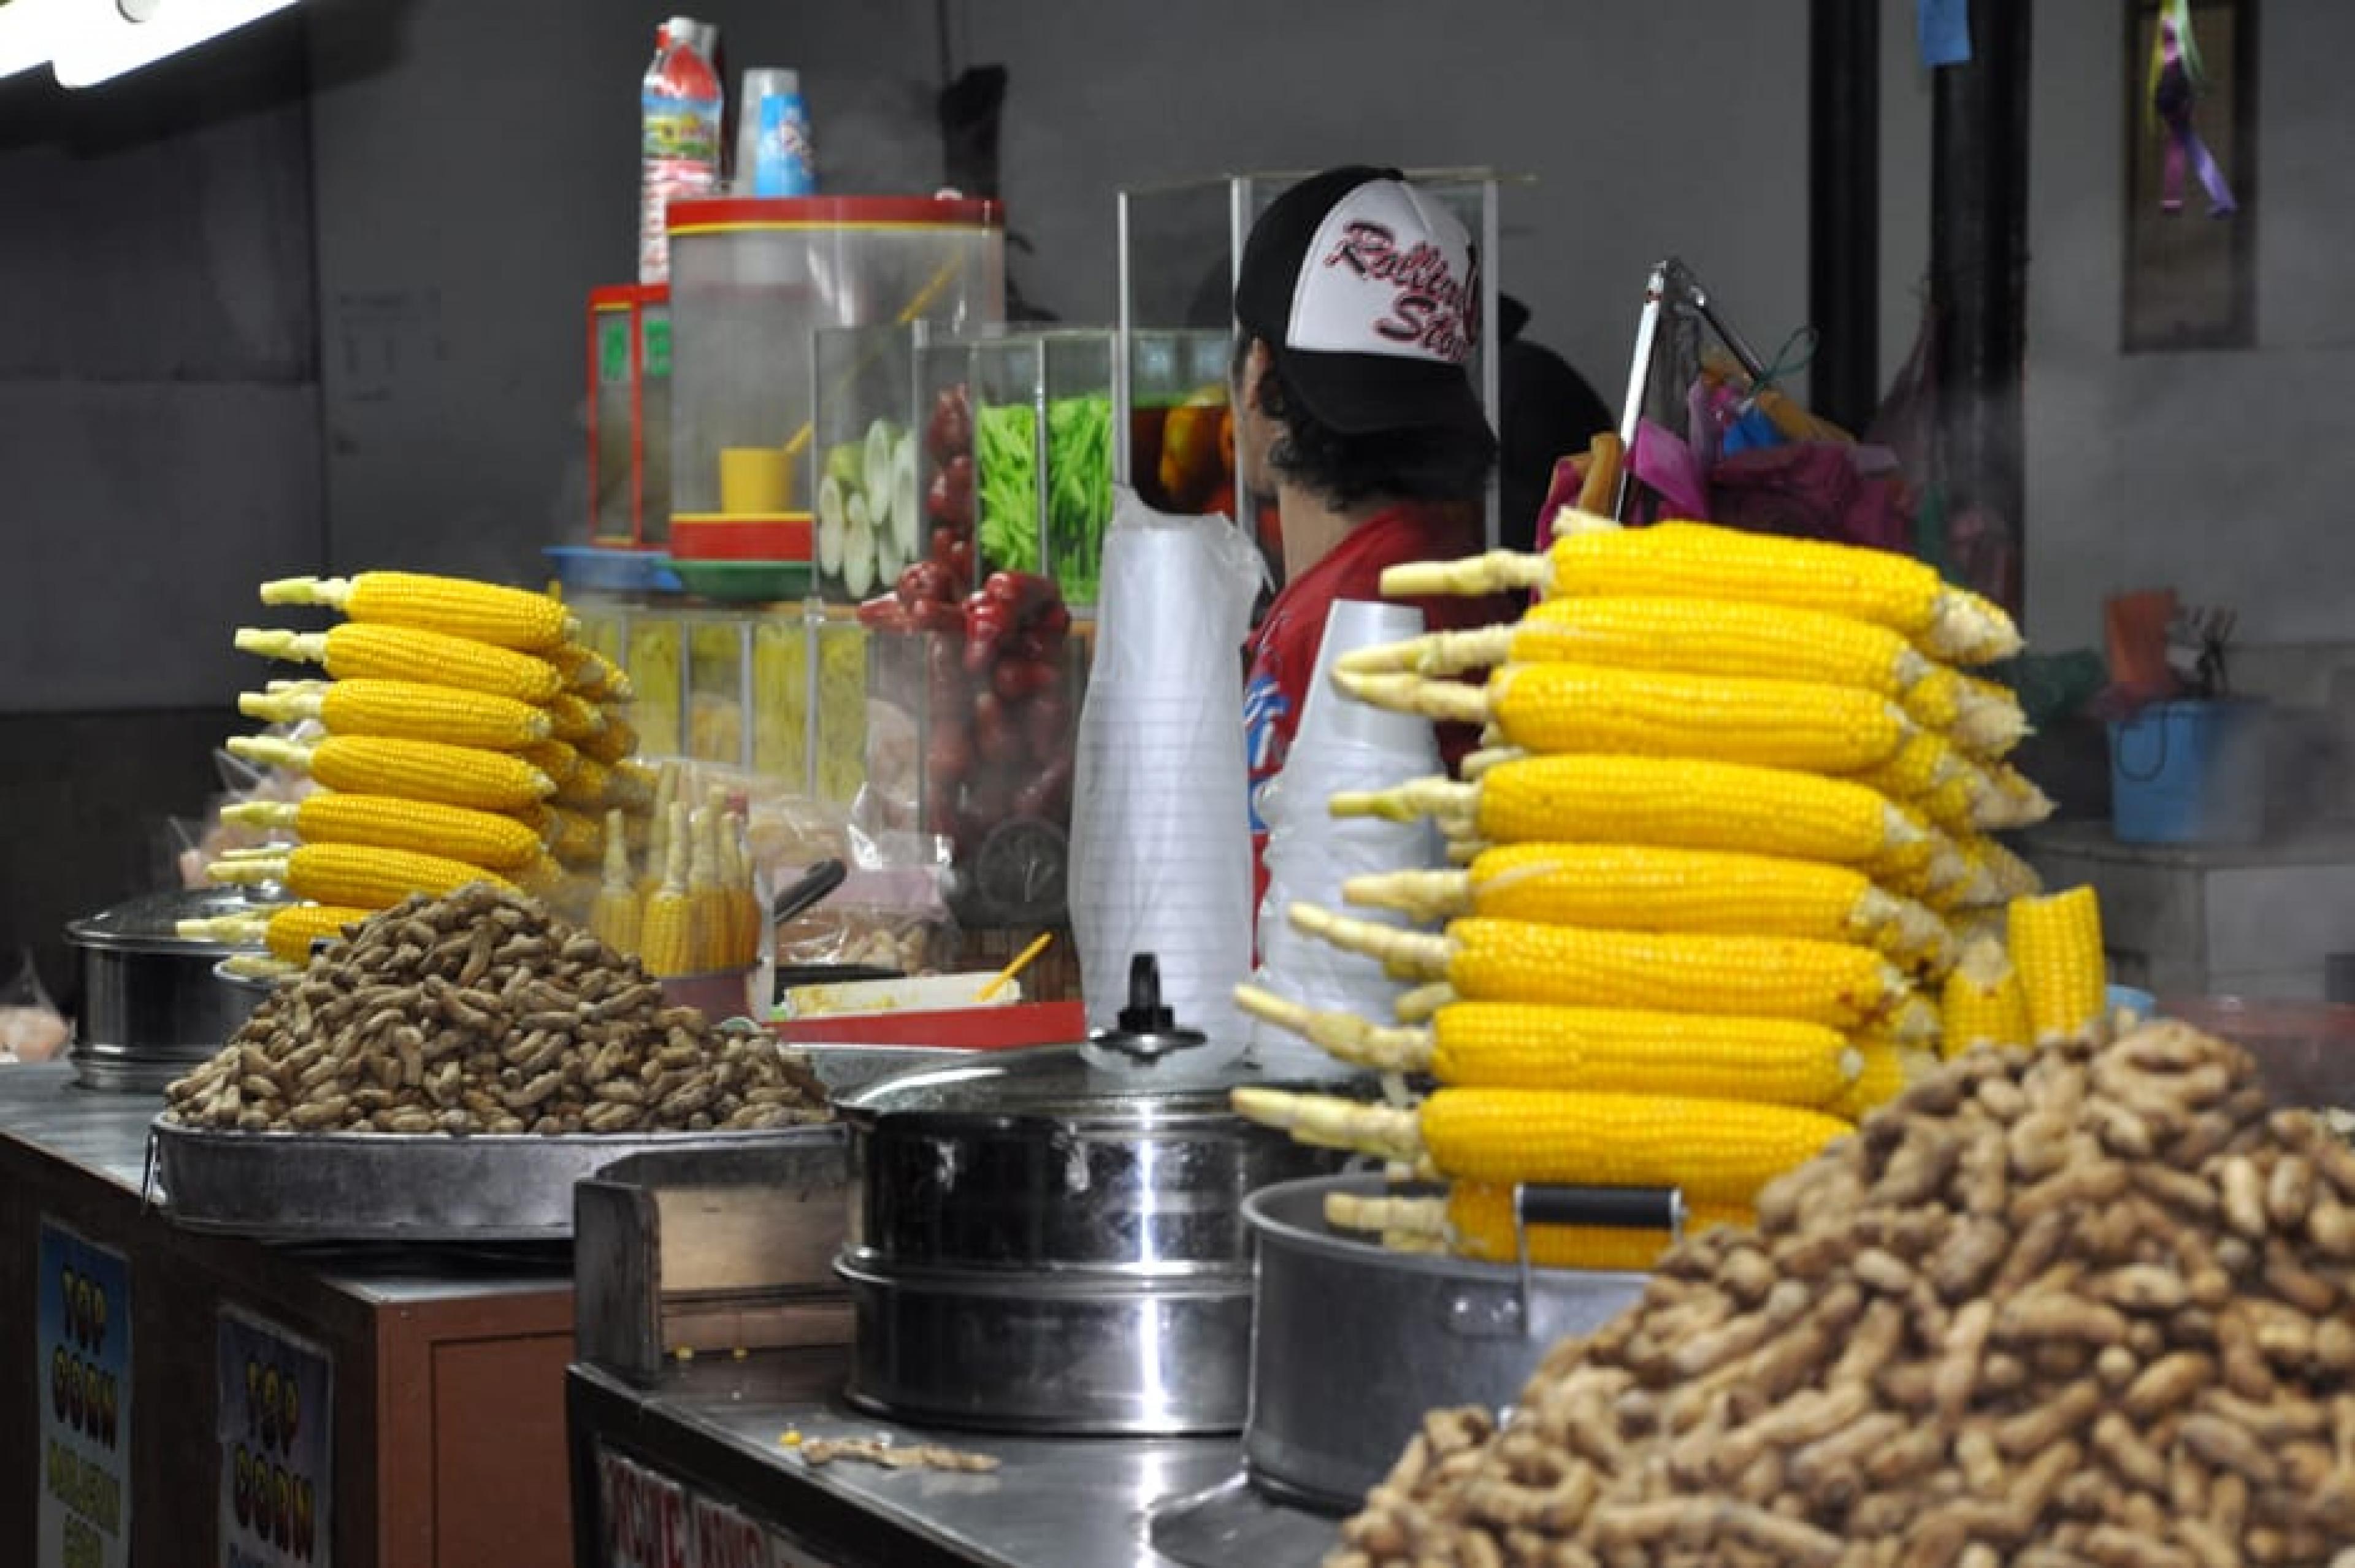 Food at Hawker Centers, Singapore - Courtesy D. Cubillas